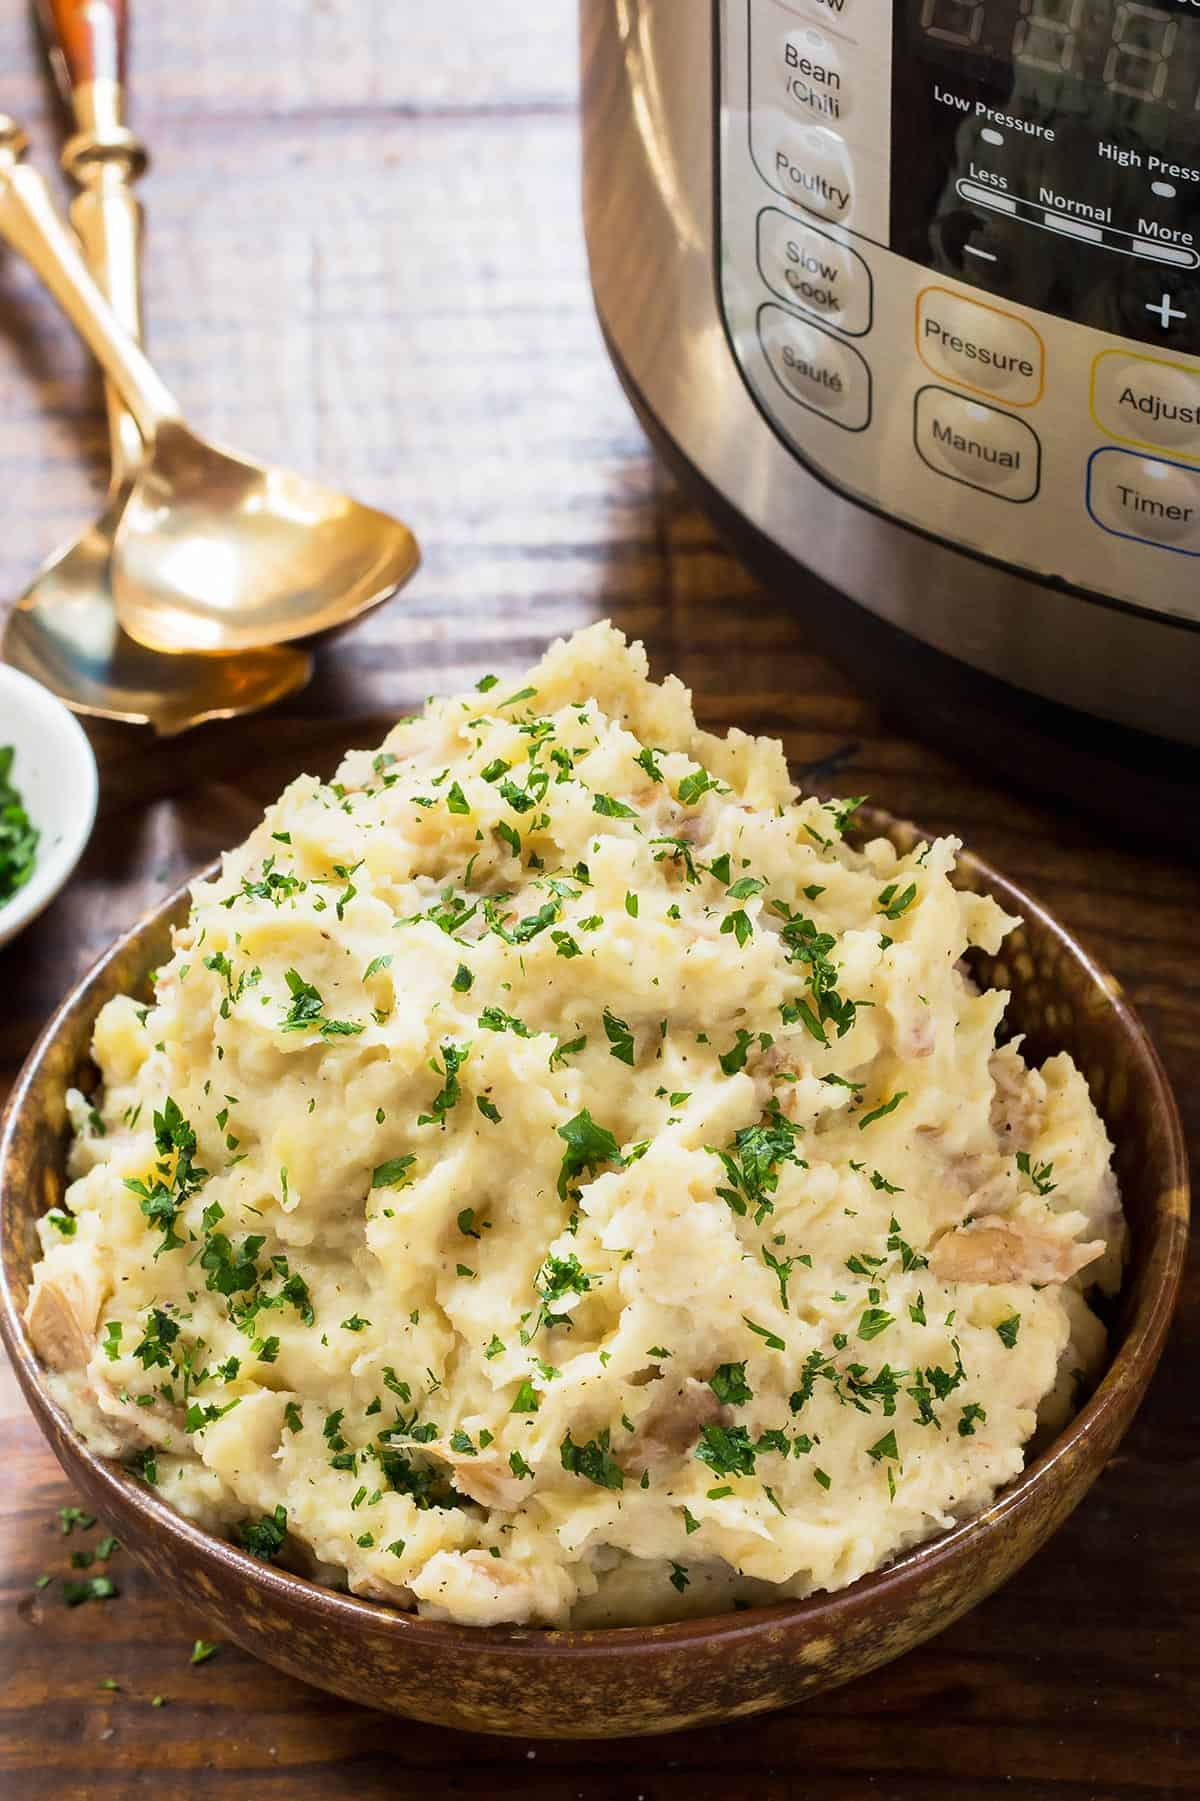 Instant Pot Mashed Potatoes in Bowl